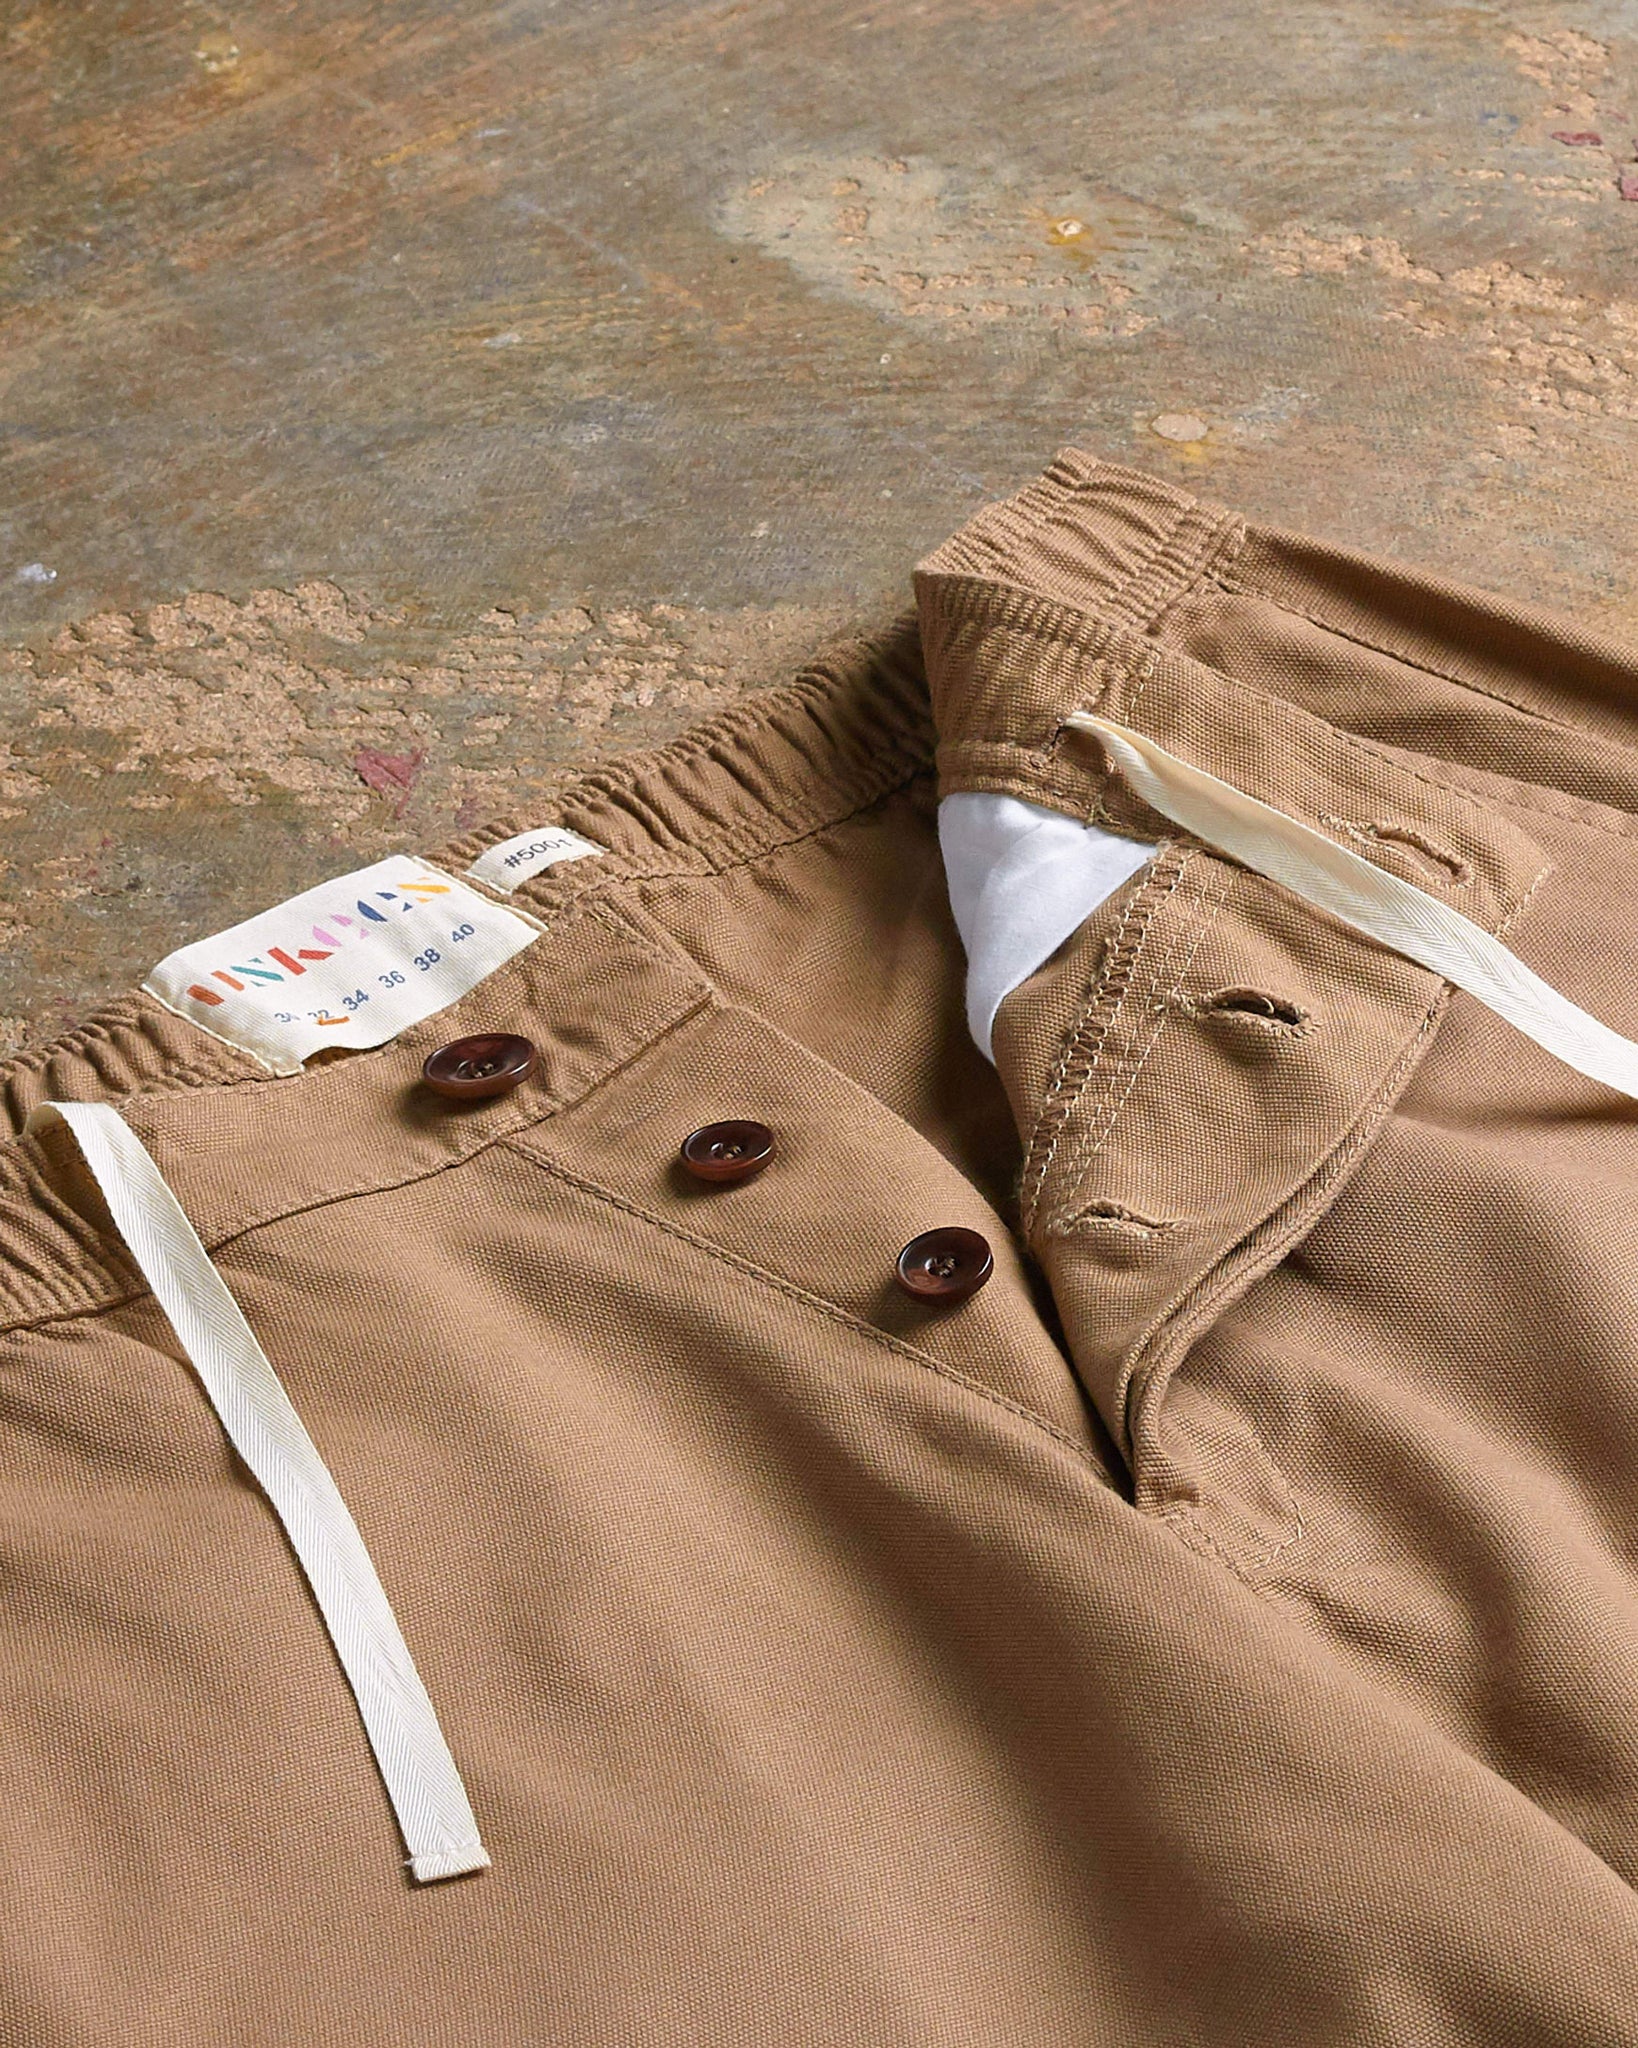 Flat and angled close-up view of Uskees khaki work pants with focus on natural corozo buttons for button fly and adjustable drawstring tie.